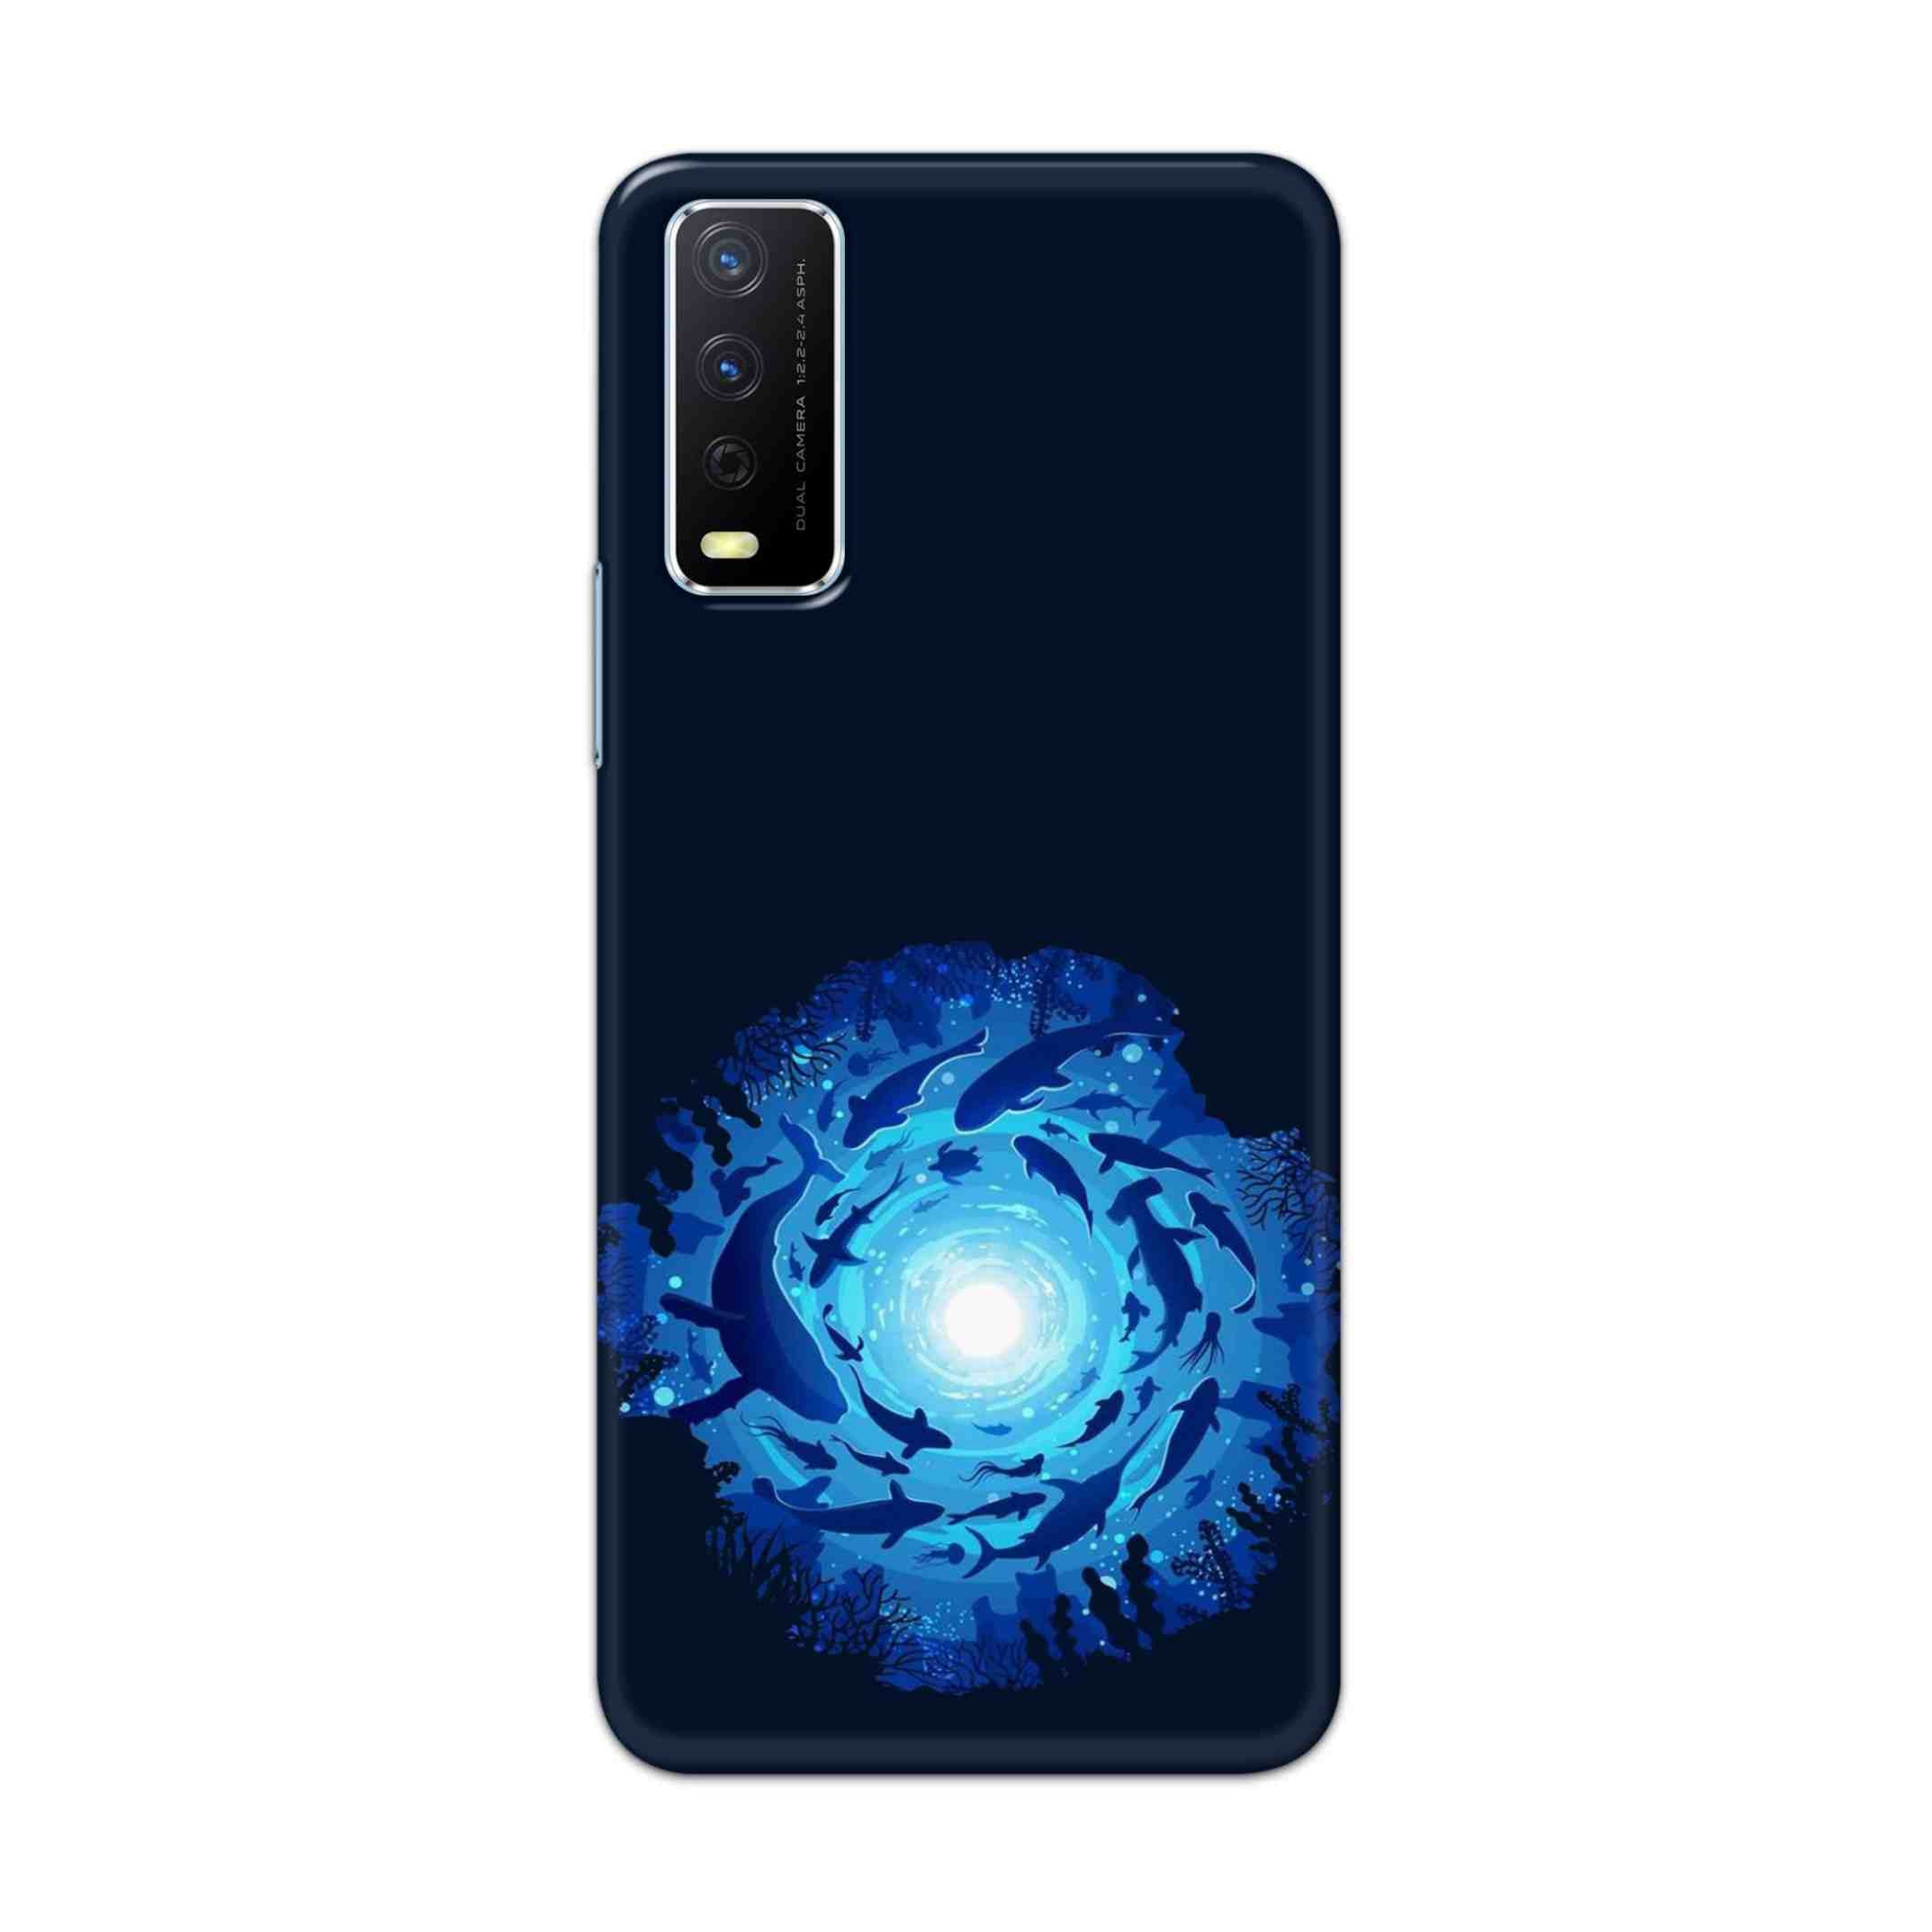 Buy Blue Whale Hard Back Mobile Phone Case Cover For Vivo Y12s Online